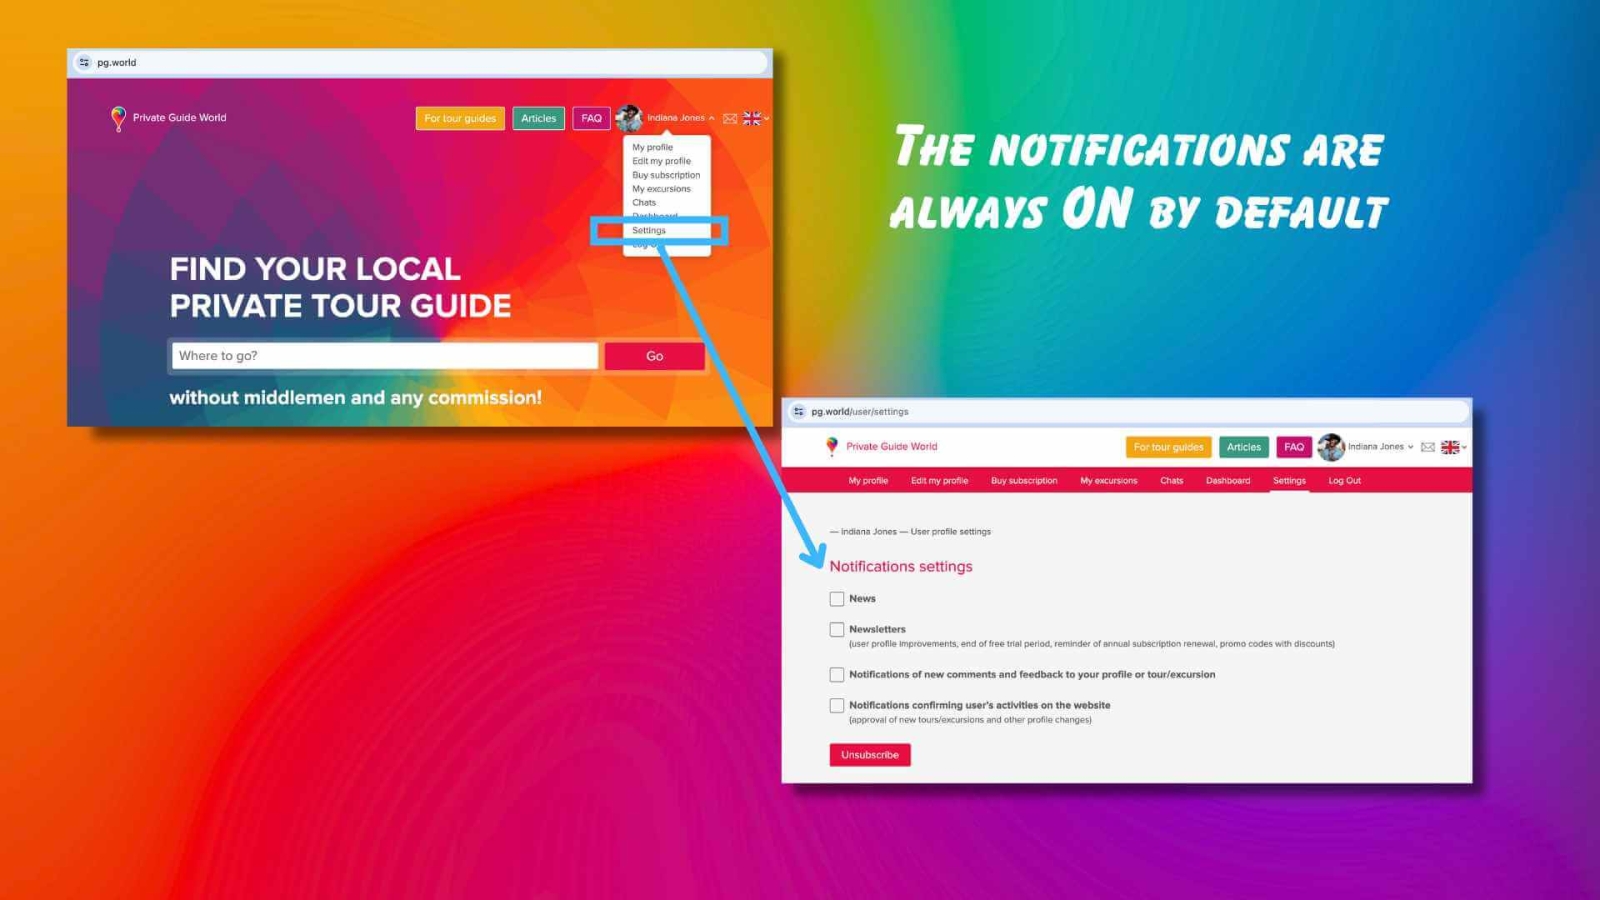 Notification settings on the PRIVATE GUIDE WORLD website